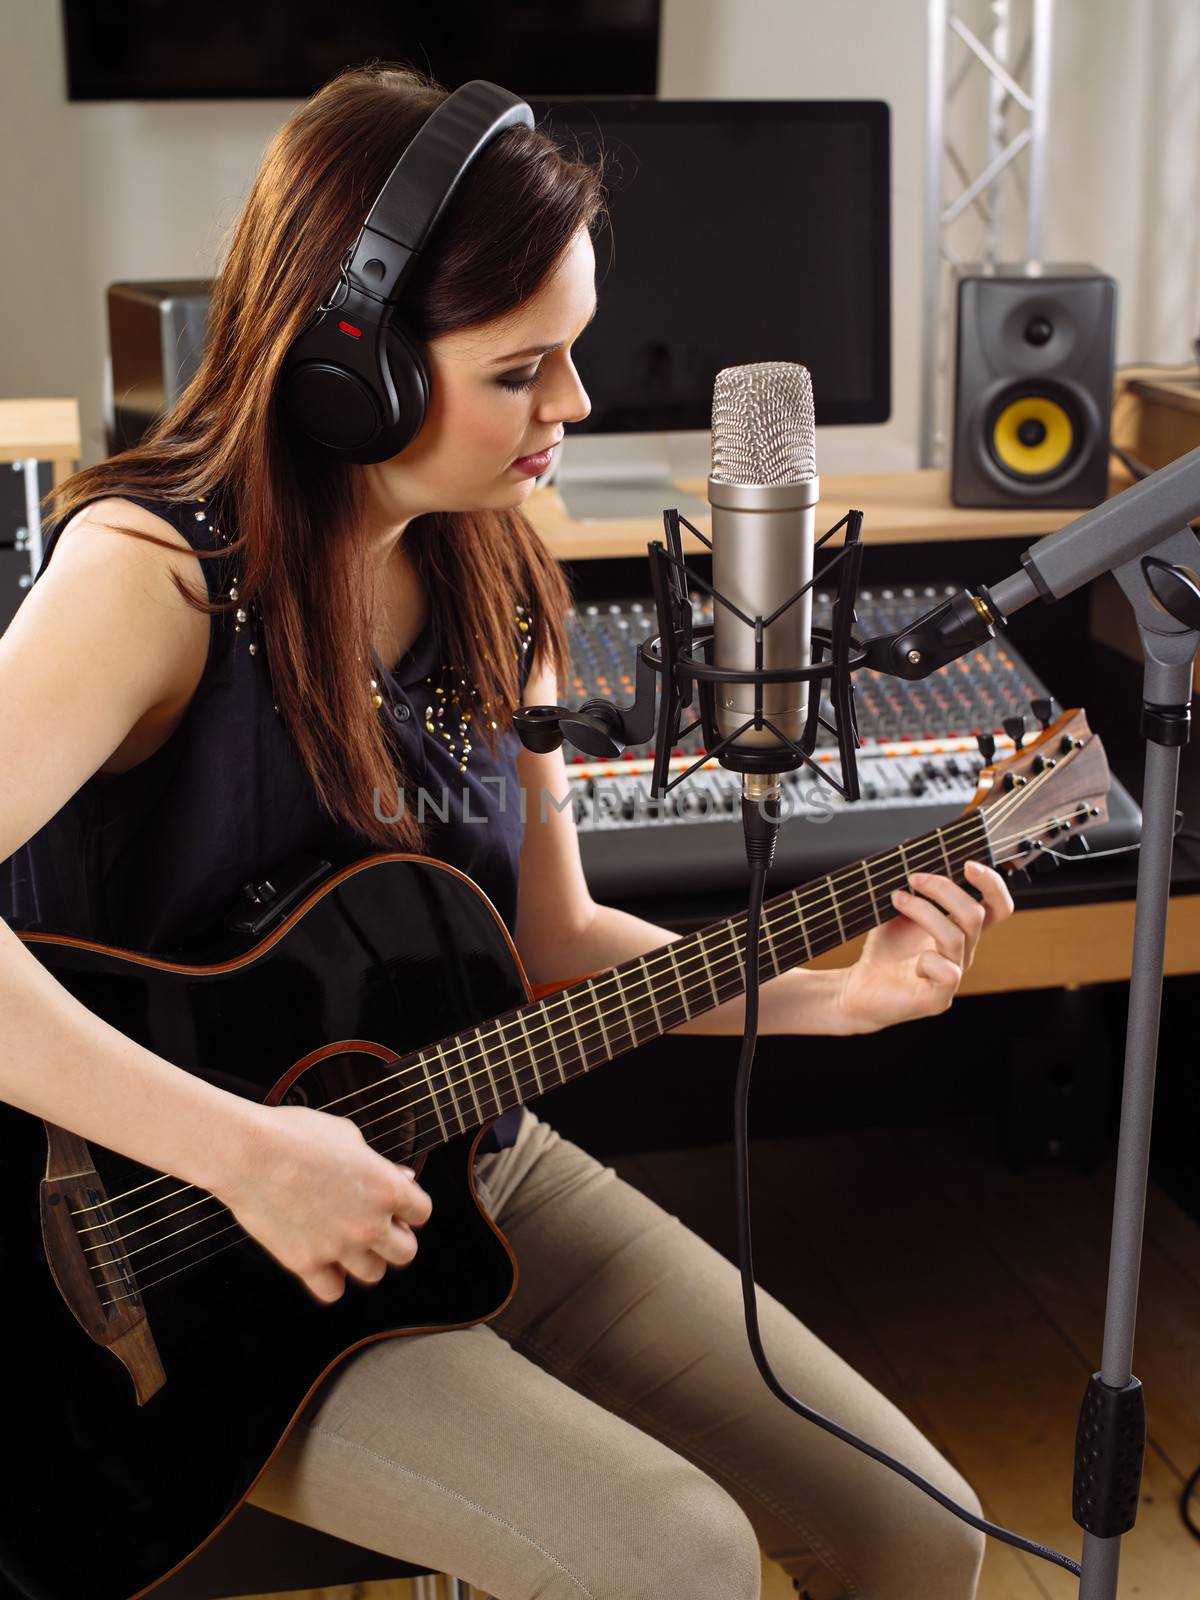 Woman with guitar in a recording studio by sumners